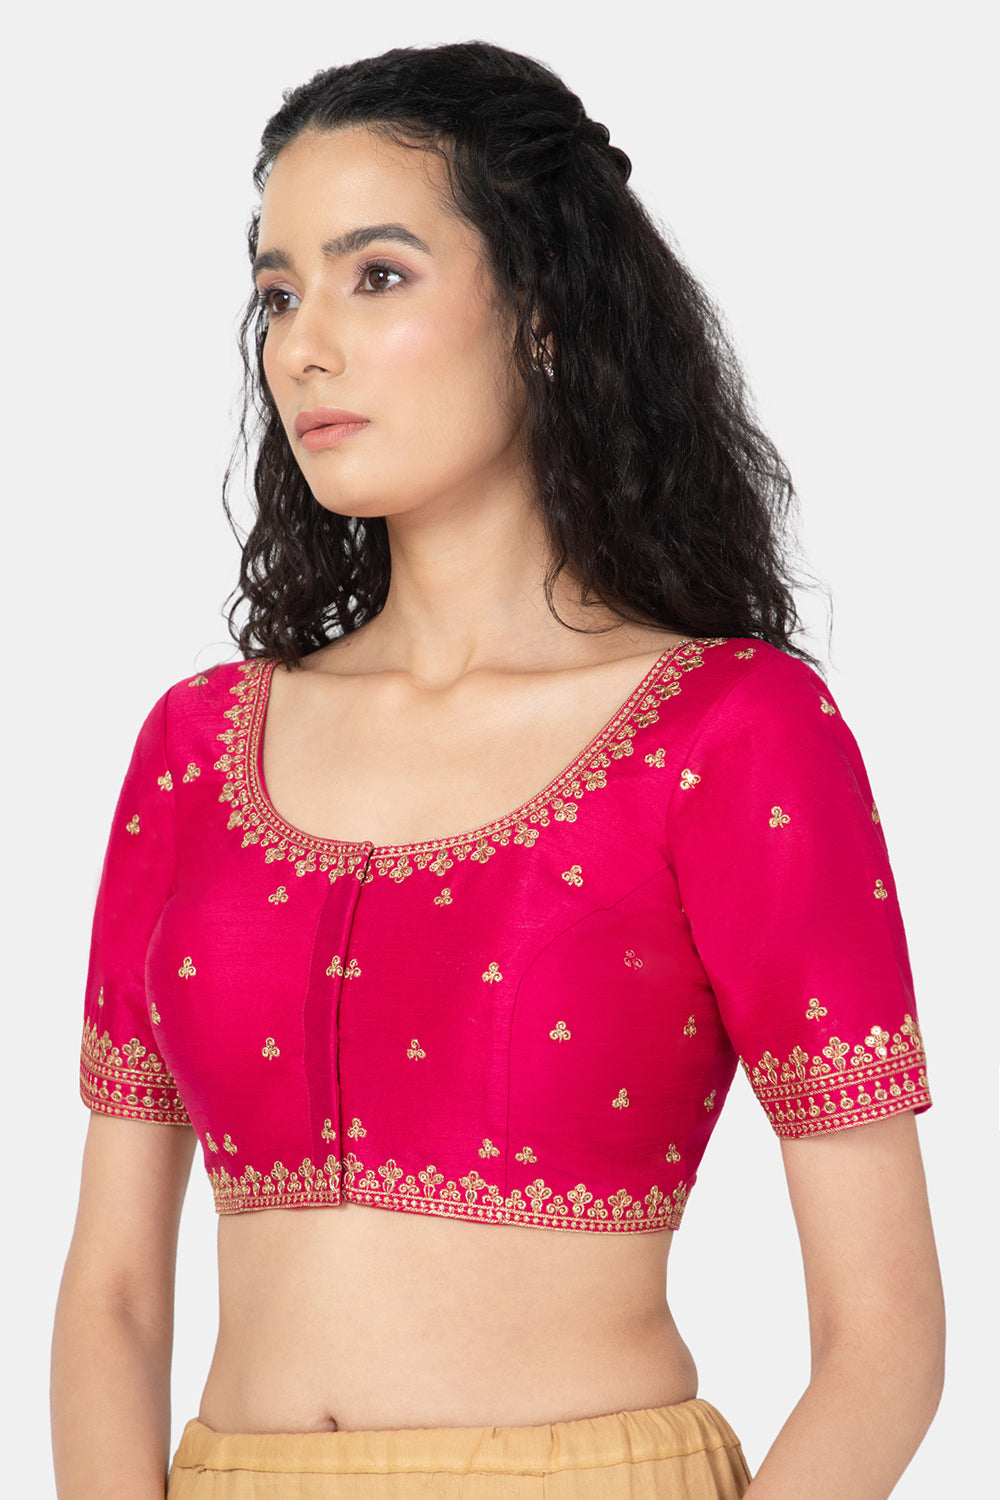 blouse front neck designs | blouse designs indian | how to stitch blouse | Neck  designs for suits, How to stitch blouse, Kurti neck designs latest fashion